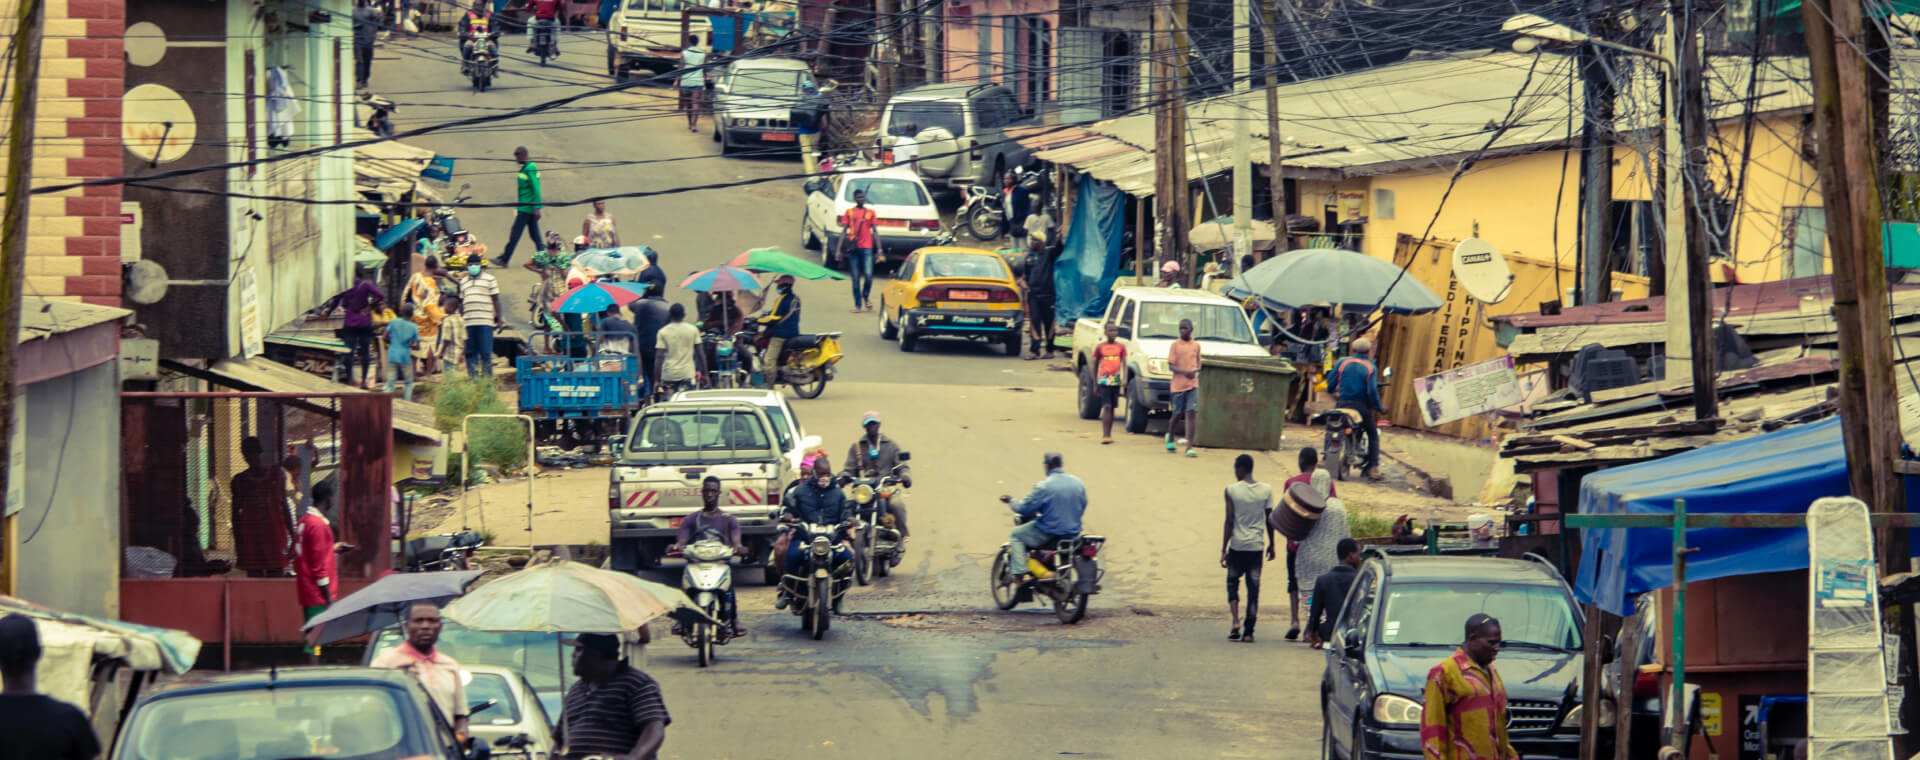 A street in nigeria with a lot of people and motorcycles.